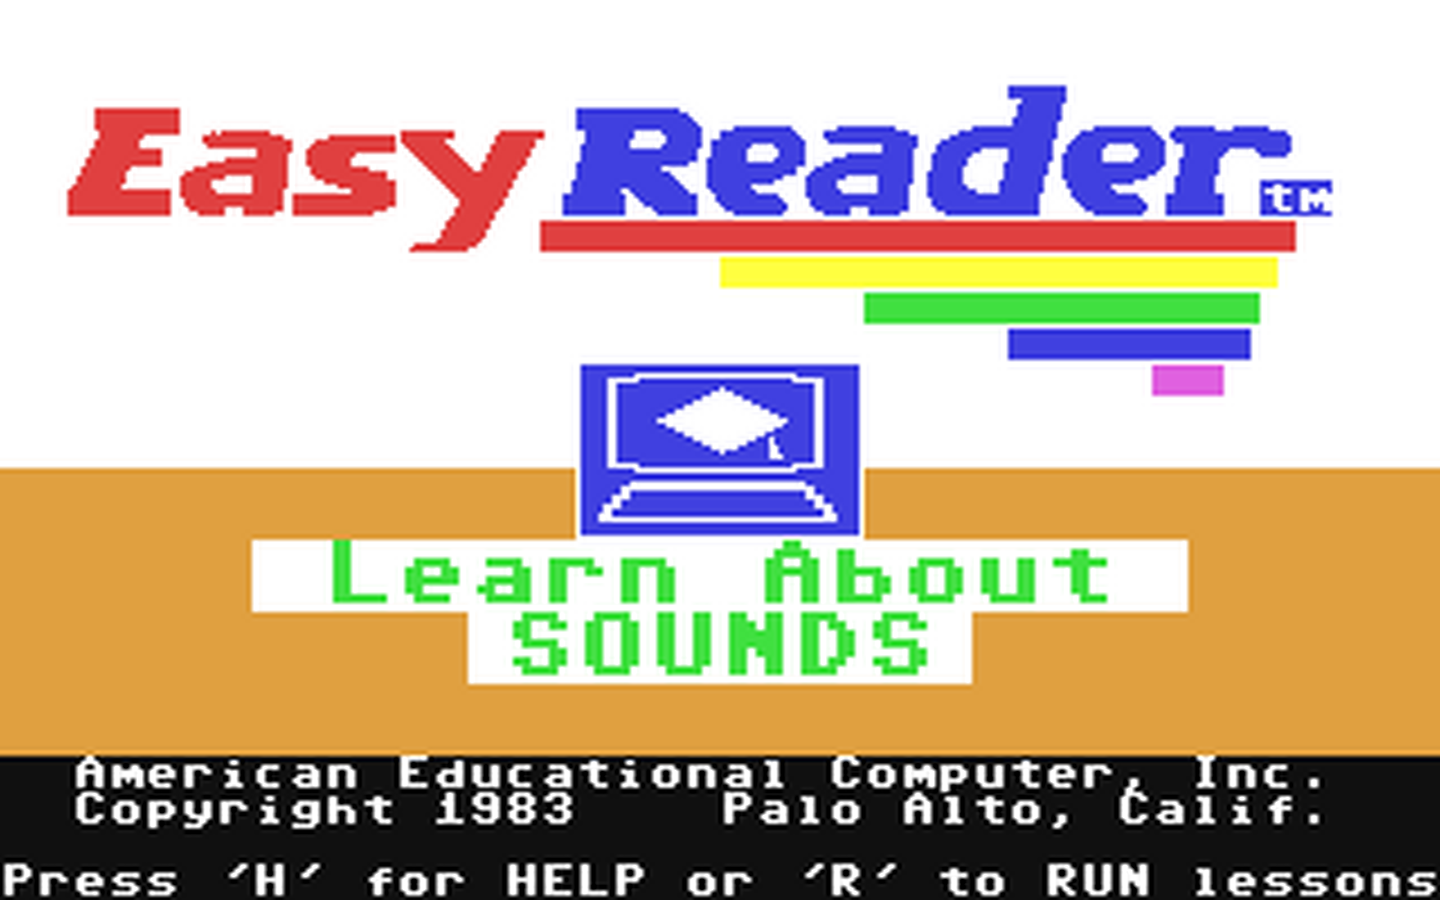 C64 GameBase EasyReader_-_Learn_About_Sounds_in_Reading American_Educational_Computer_(AEC) 1983